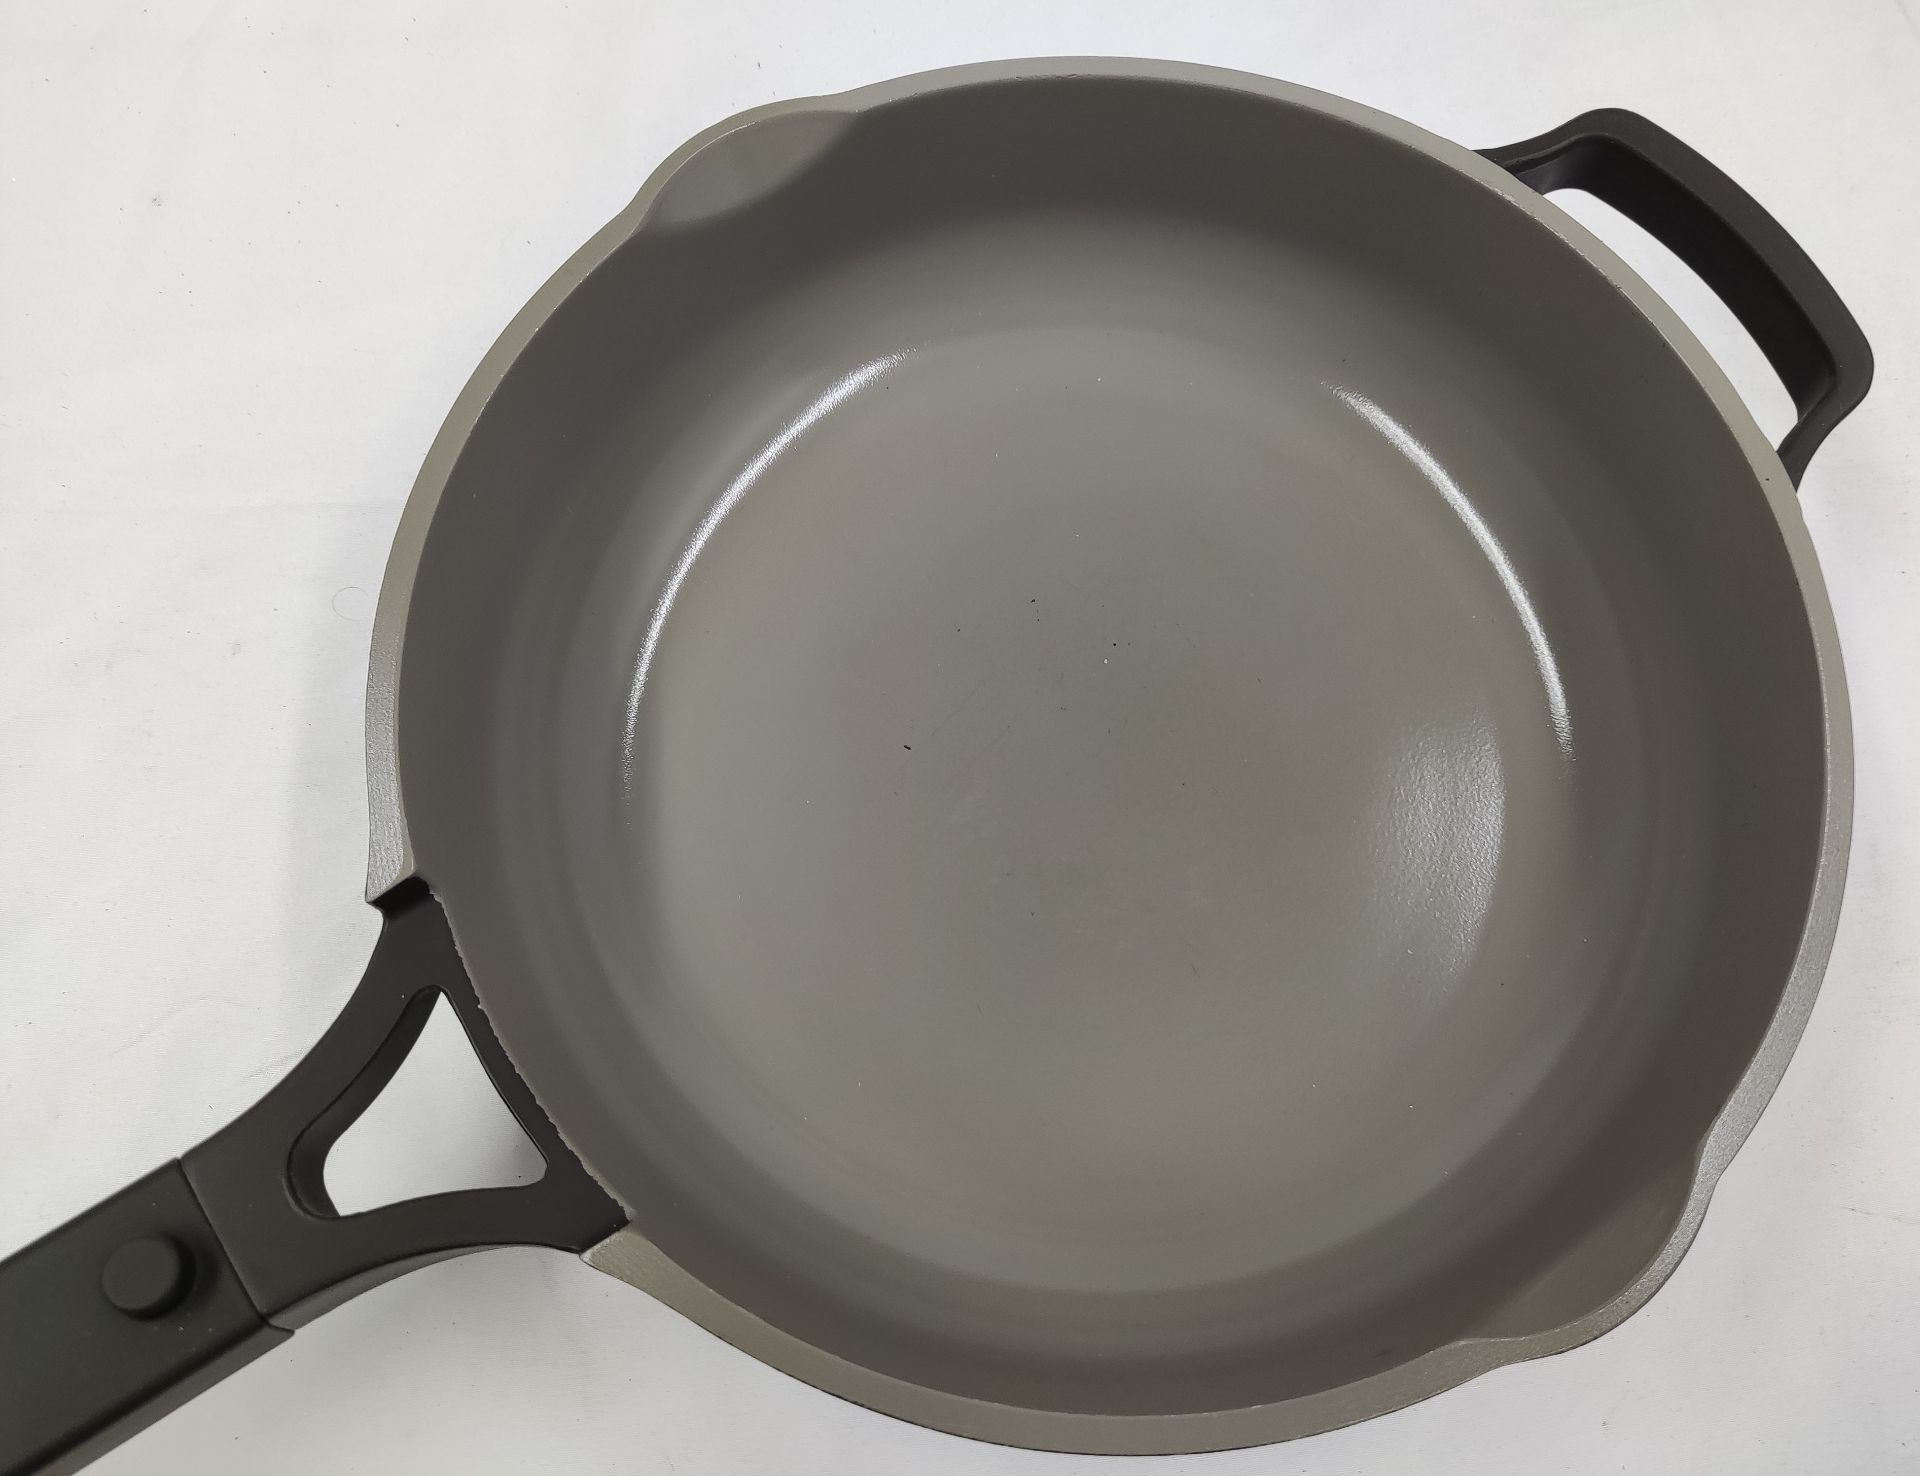 1 x OUR PLACE Our Place Cast Iron Always Pan In Charcoal - RRP £135 - Ref: 7260391/HOC165/HC6 - - Image 8 of 17